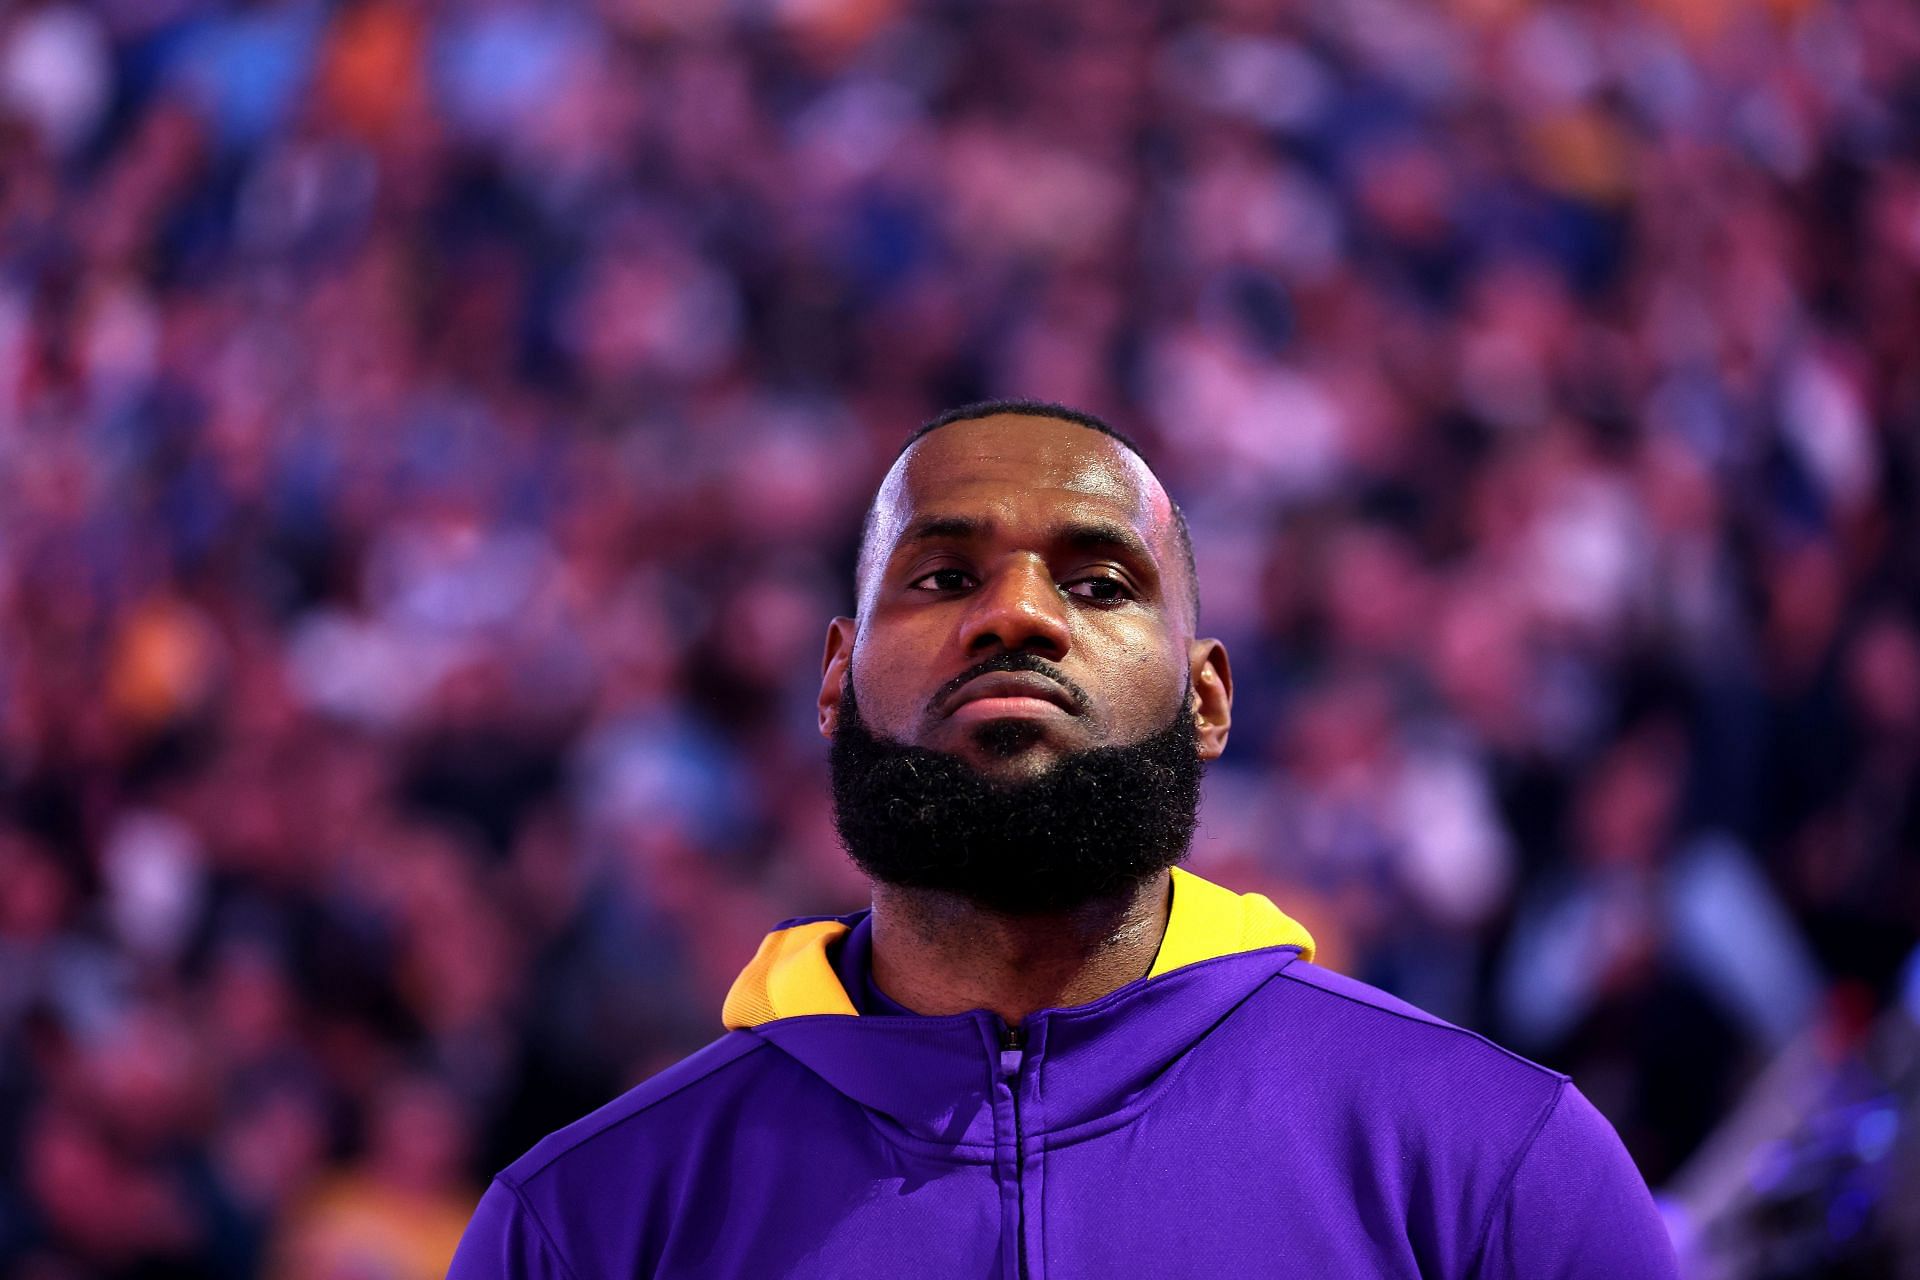 LeBron James shuts down doubters in Lakers' OT thriller – New York